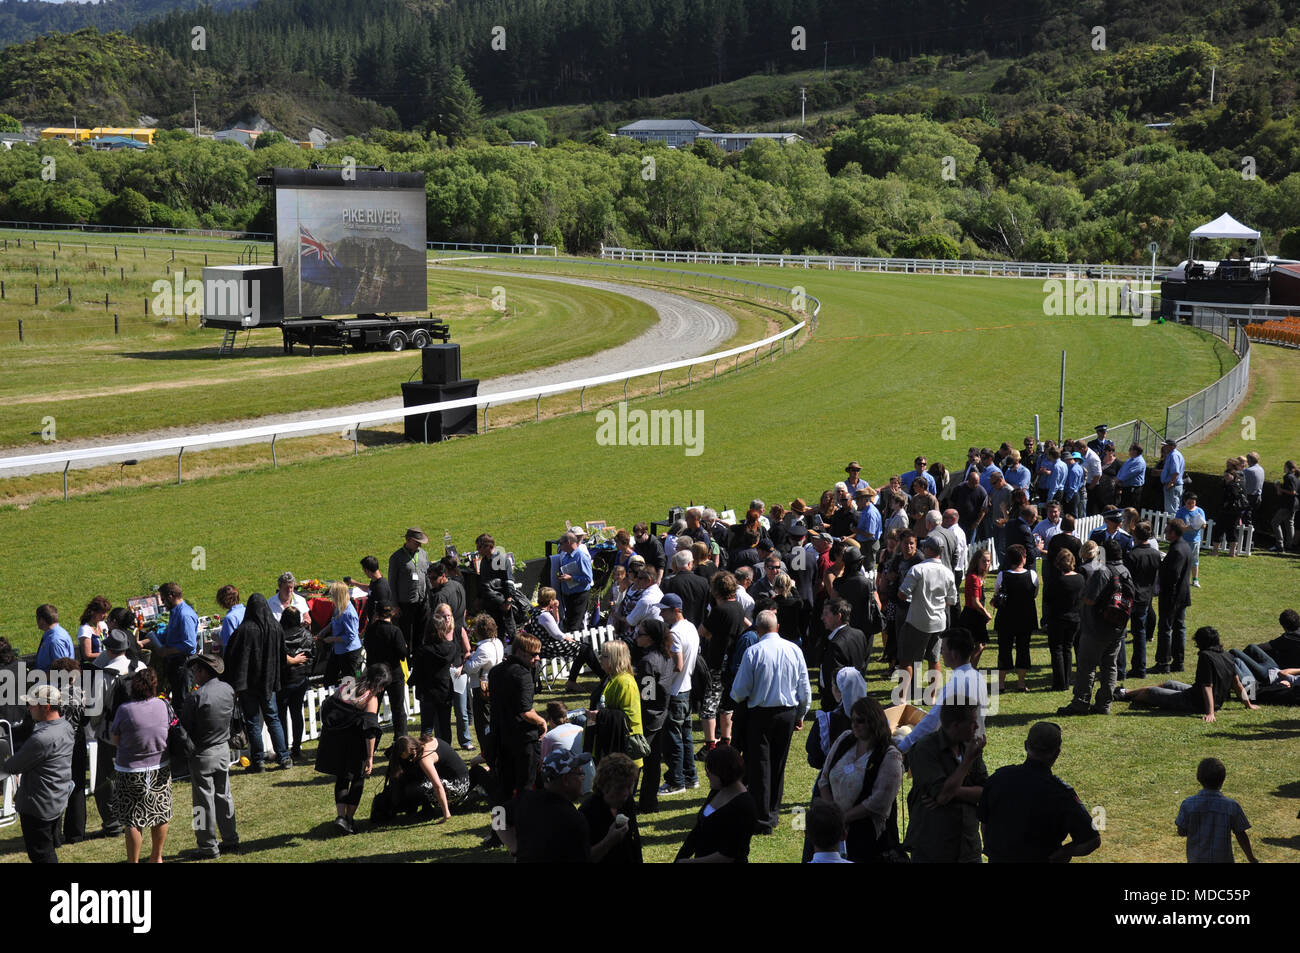 crowds at the Pike River Memorial Service, held in honour of the 29 men killed in the Pike River Mine near Greymouth, 2010 Stock Photo